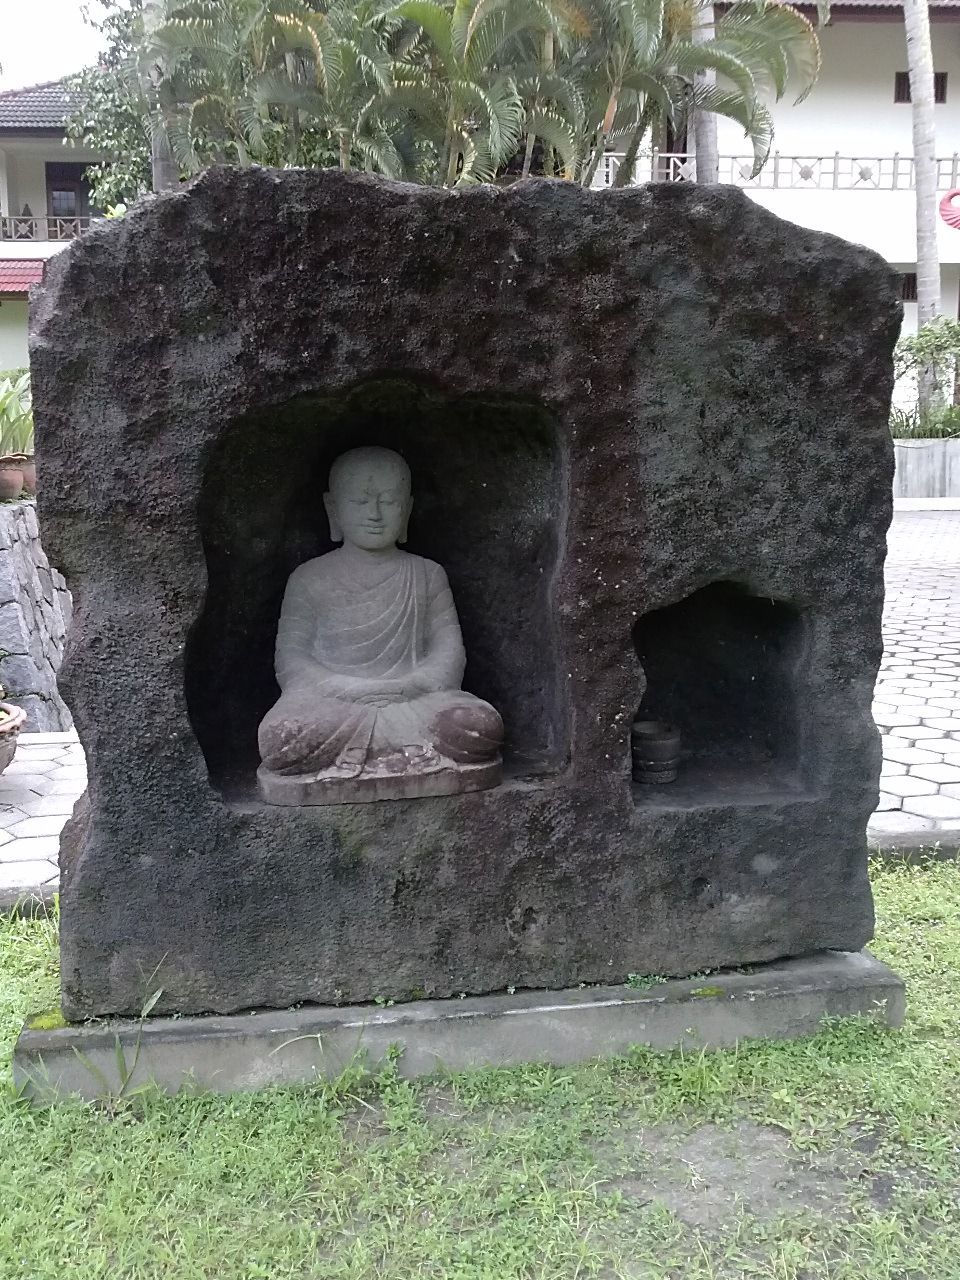 statue, sculpture, human representation, art, art and craft, creativity, built structure, stone material, architecture, building exterior, religion, carving - craft product, history, buddha, spirituality, old, craft